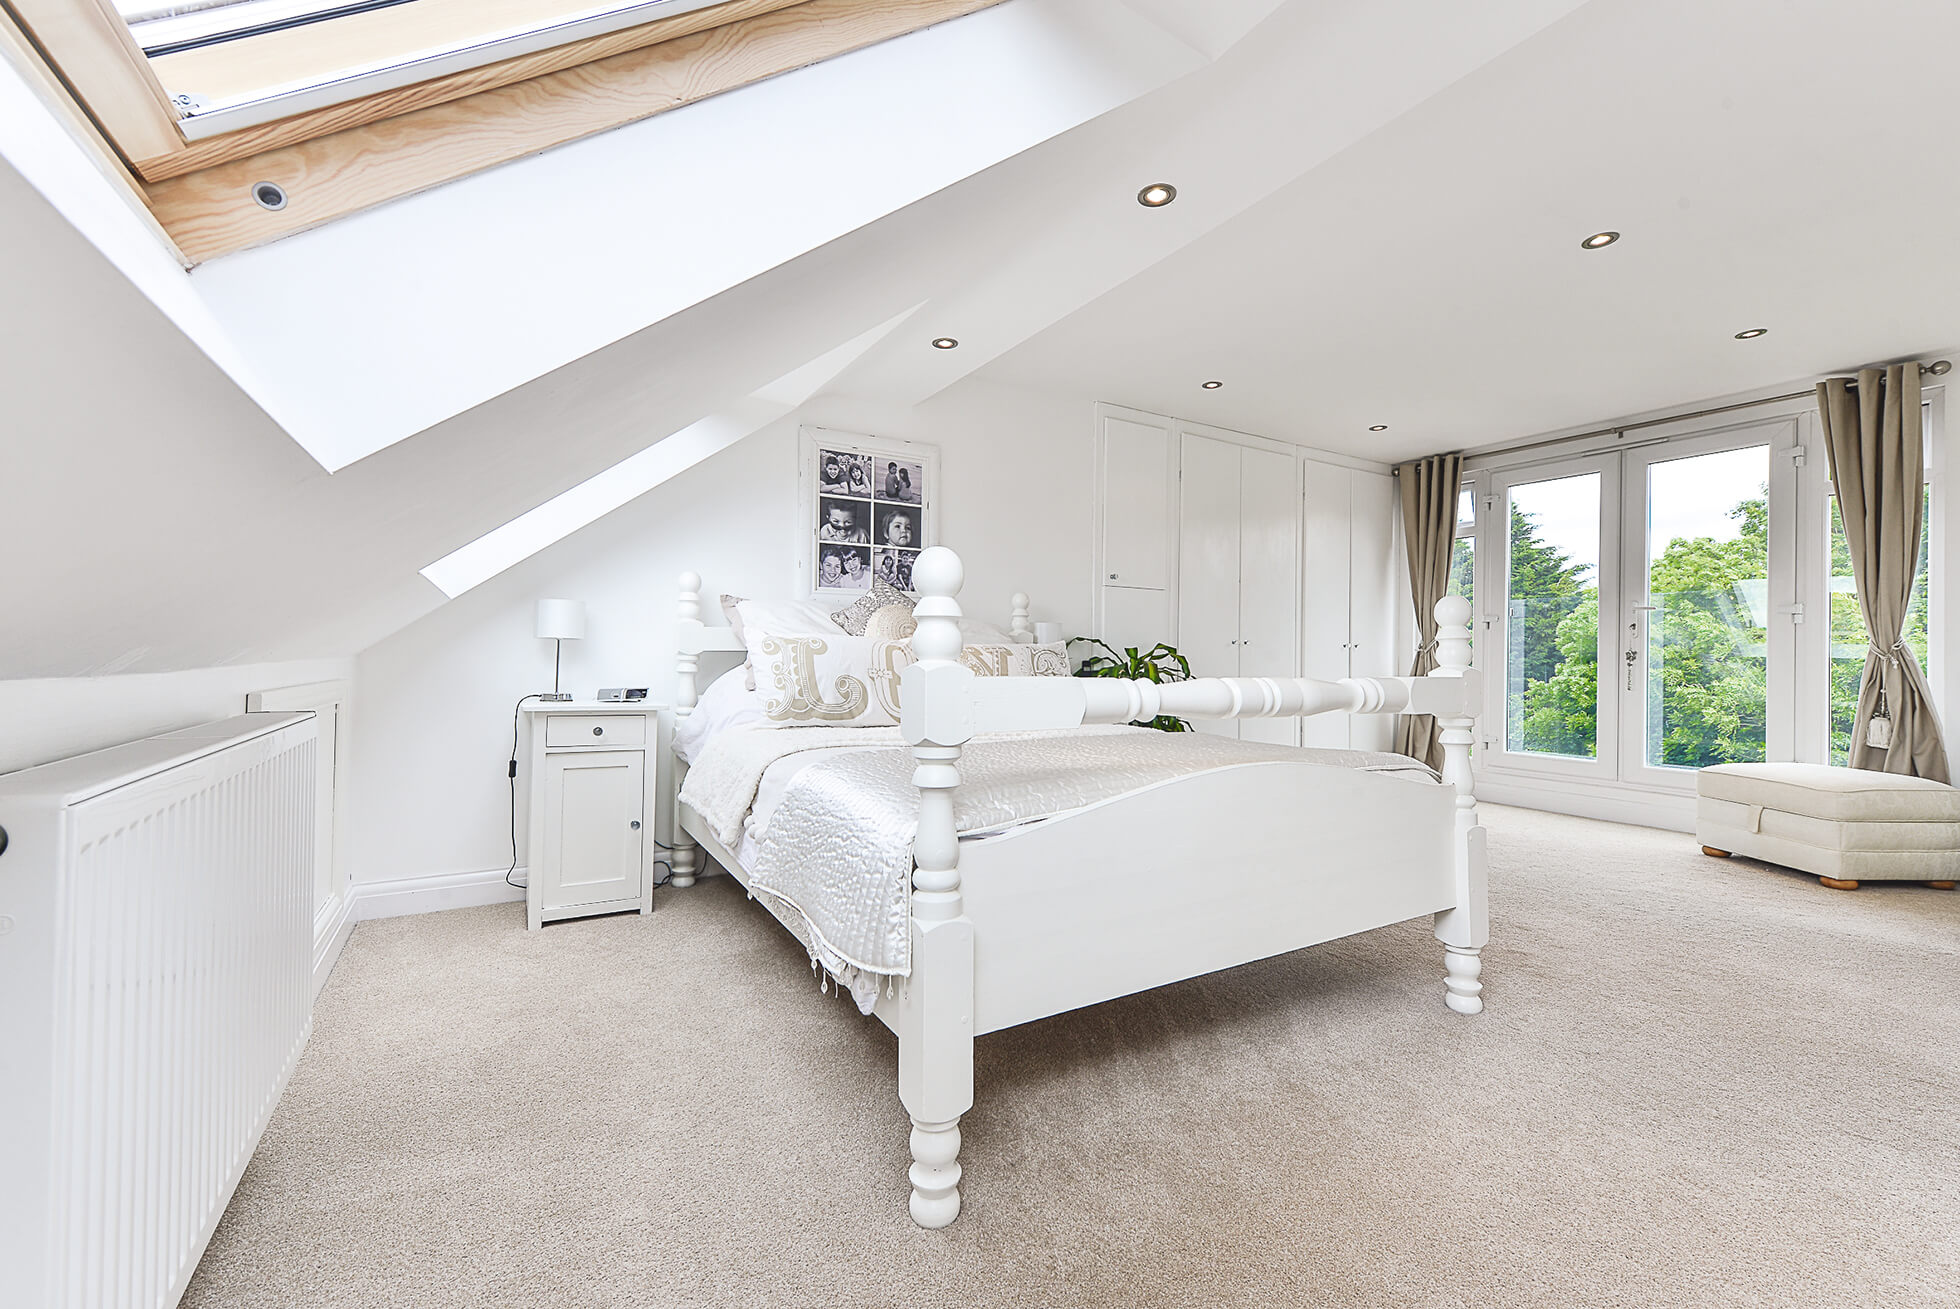 Do you have a question about converting your Loft in Wadesmill? Here are the most popular questions asked by our clients.